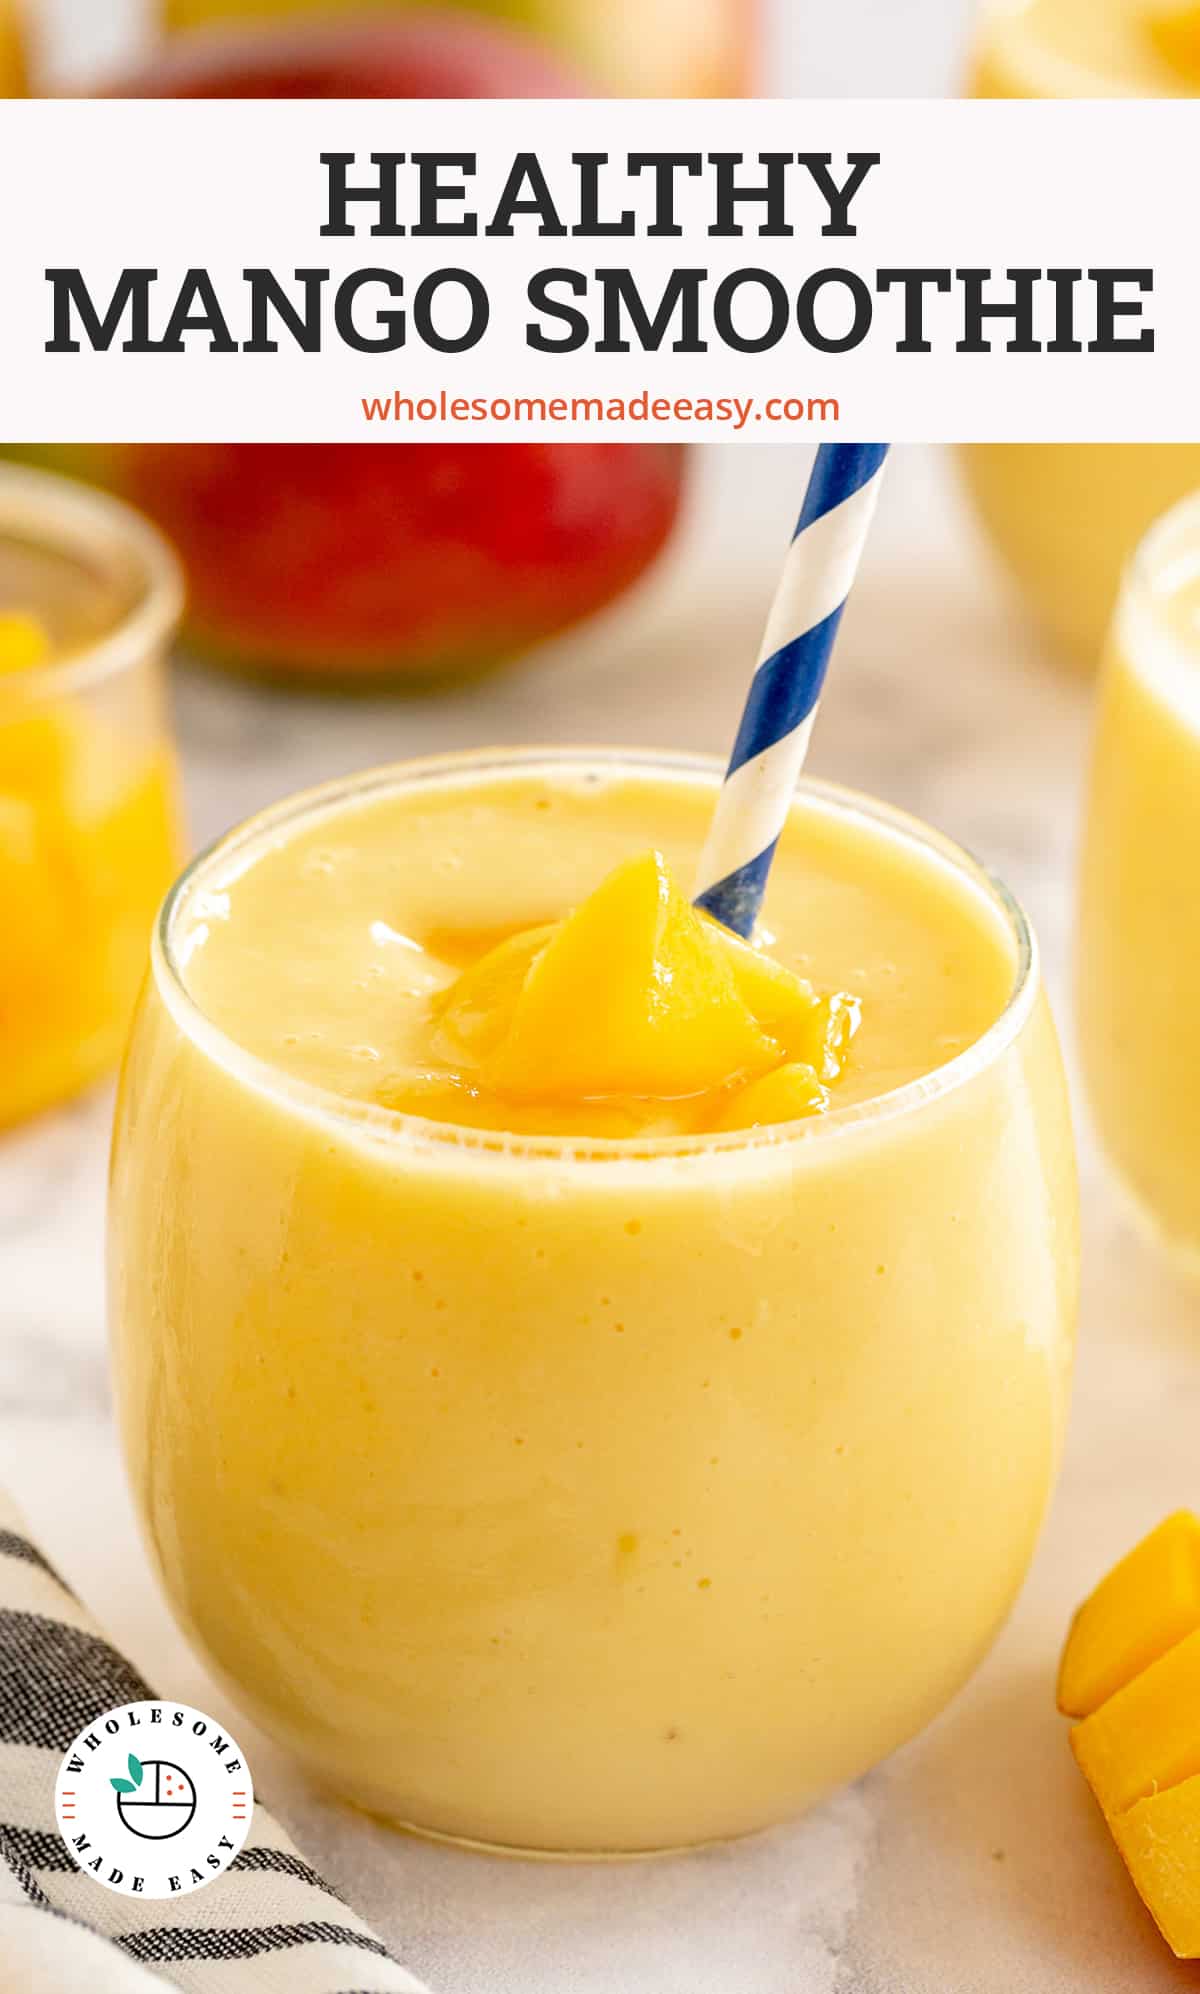 A mango smoothie in a glass cup with a blue straw with text overlay.